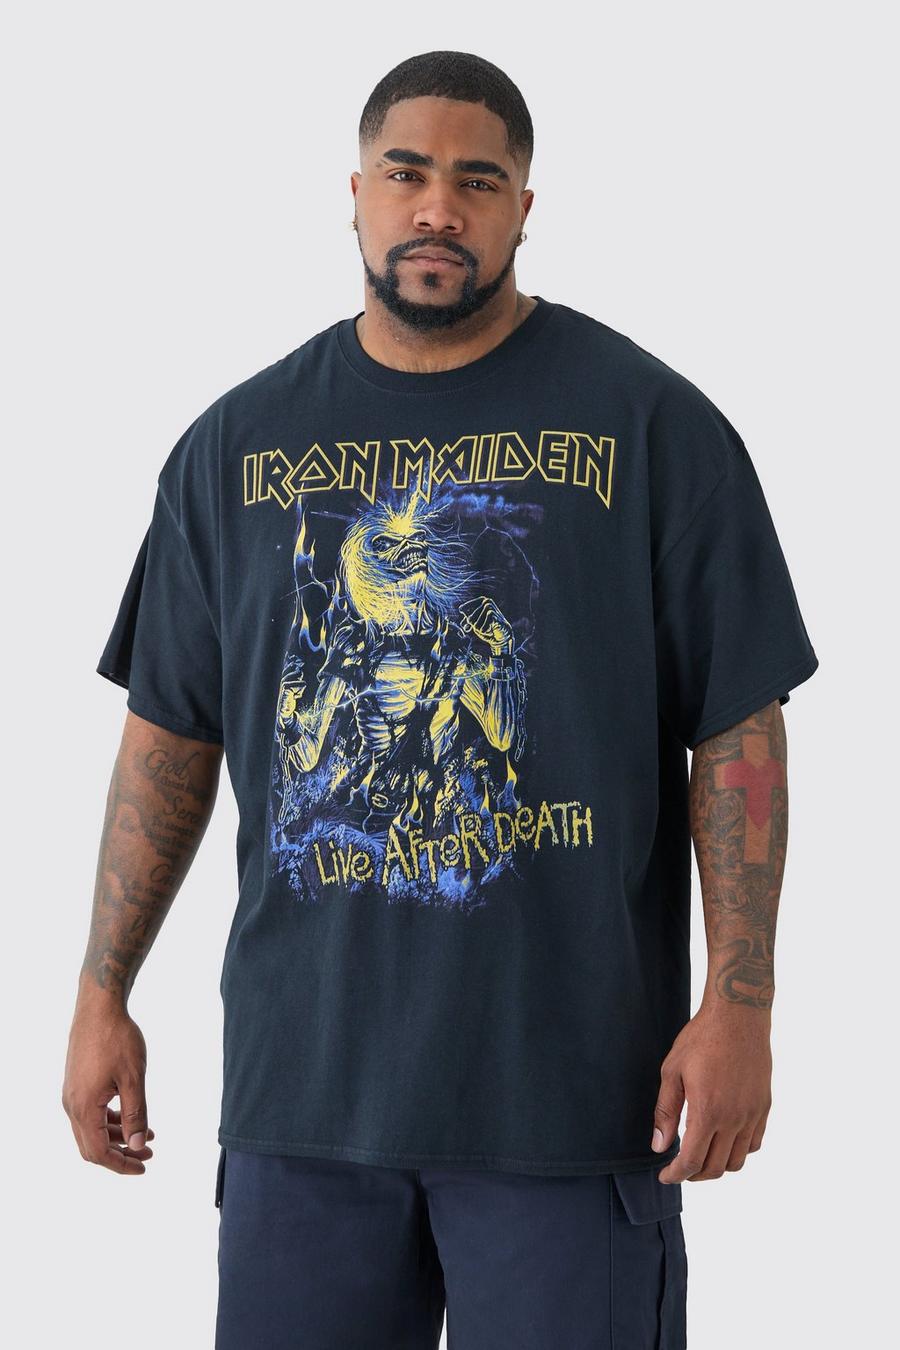 Plus Oversized Iron Maiden Licence T-shirt In Black 